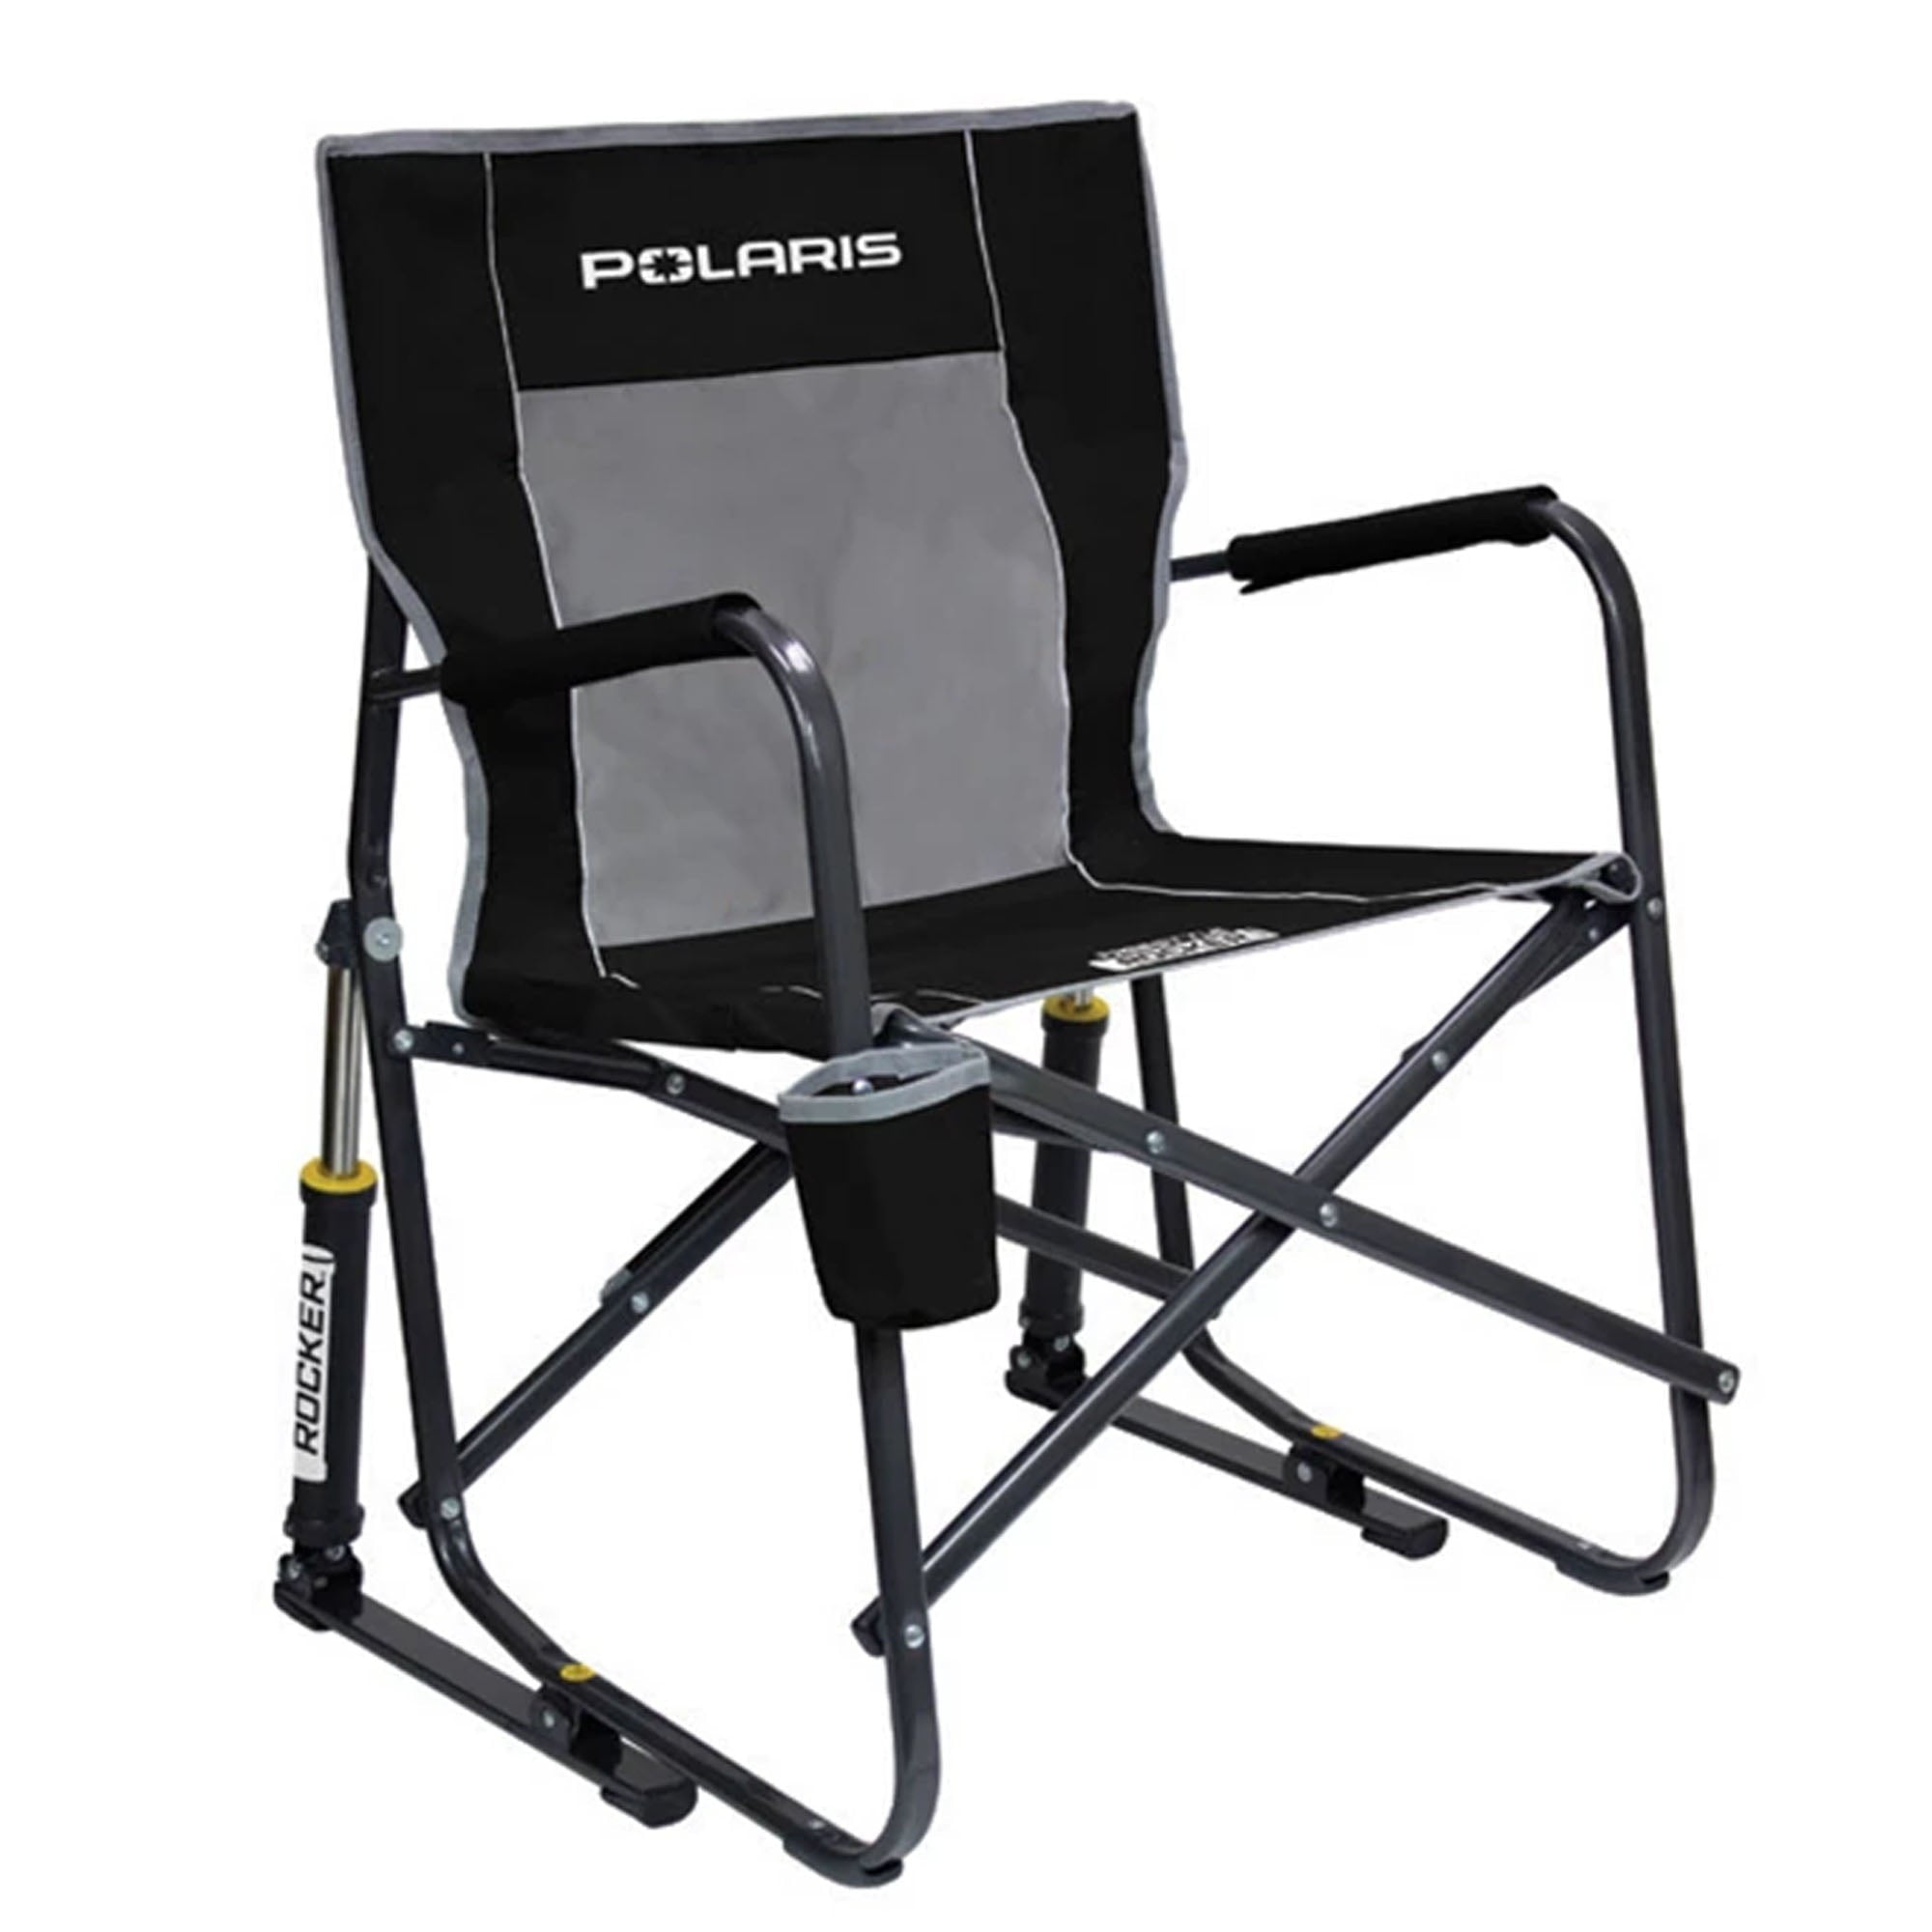 Polaris 2862625 Freestyle Rocker Chair Outdoors Camping Hiking Foldable Seat